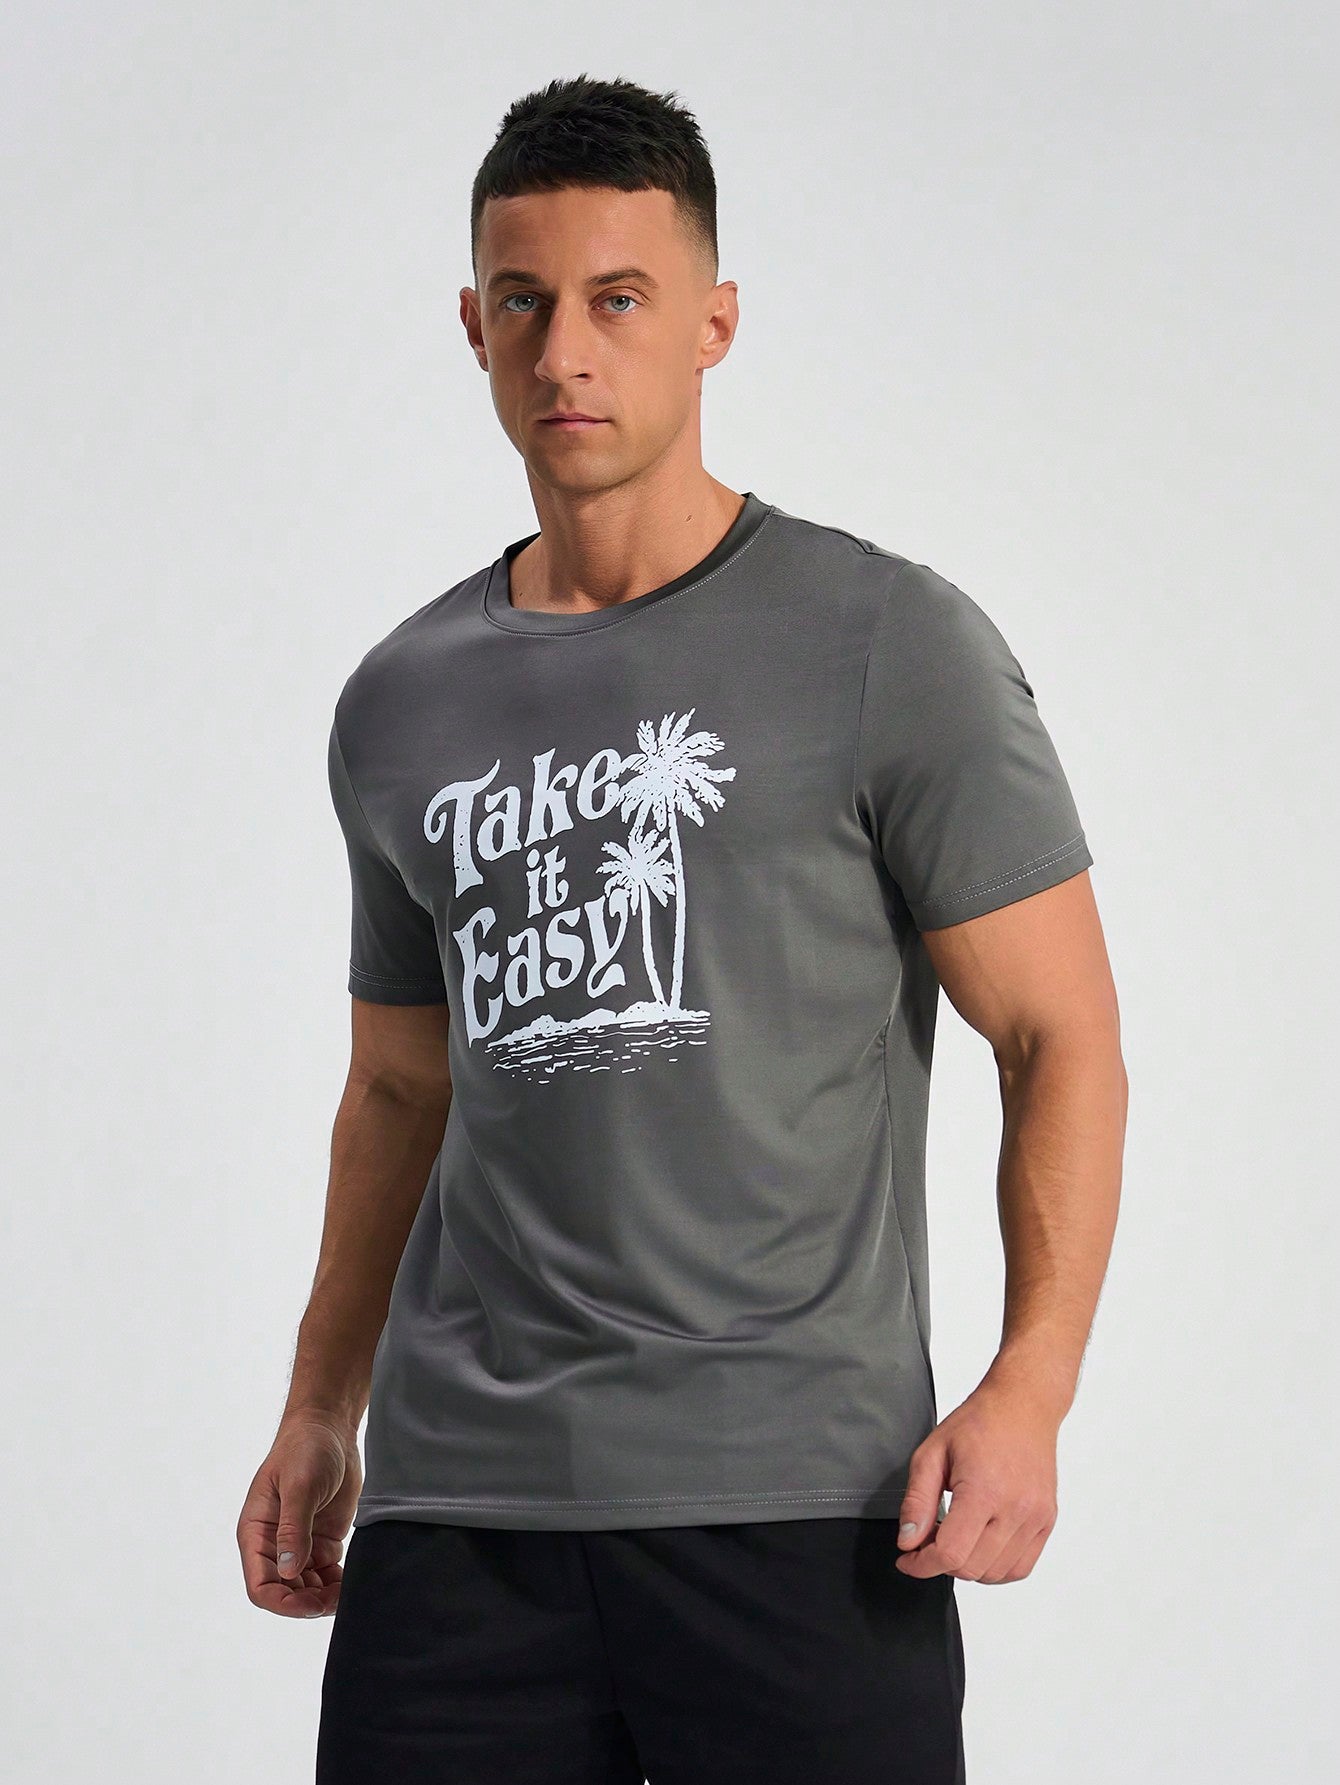 Men's Summer Casual Sports T-Shirt With Round Neck And Palm Tree Graphic